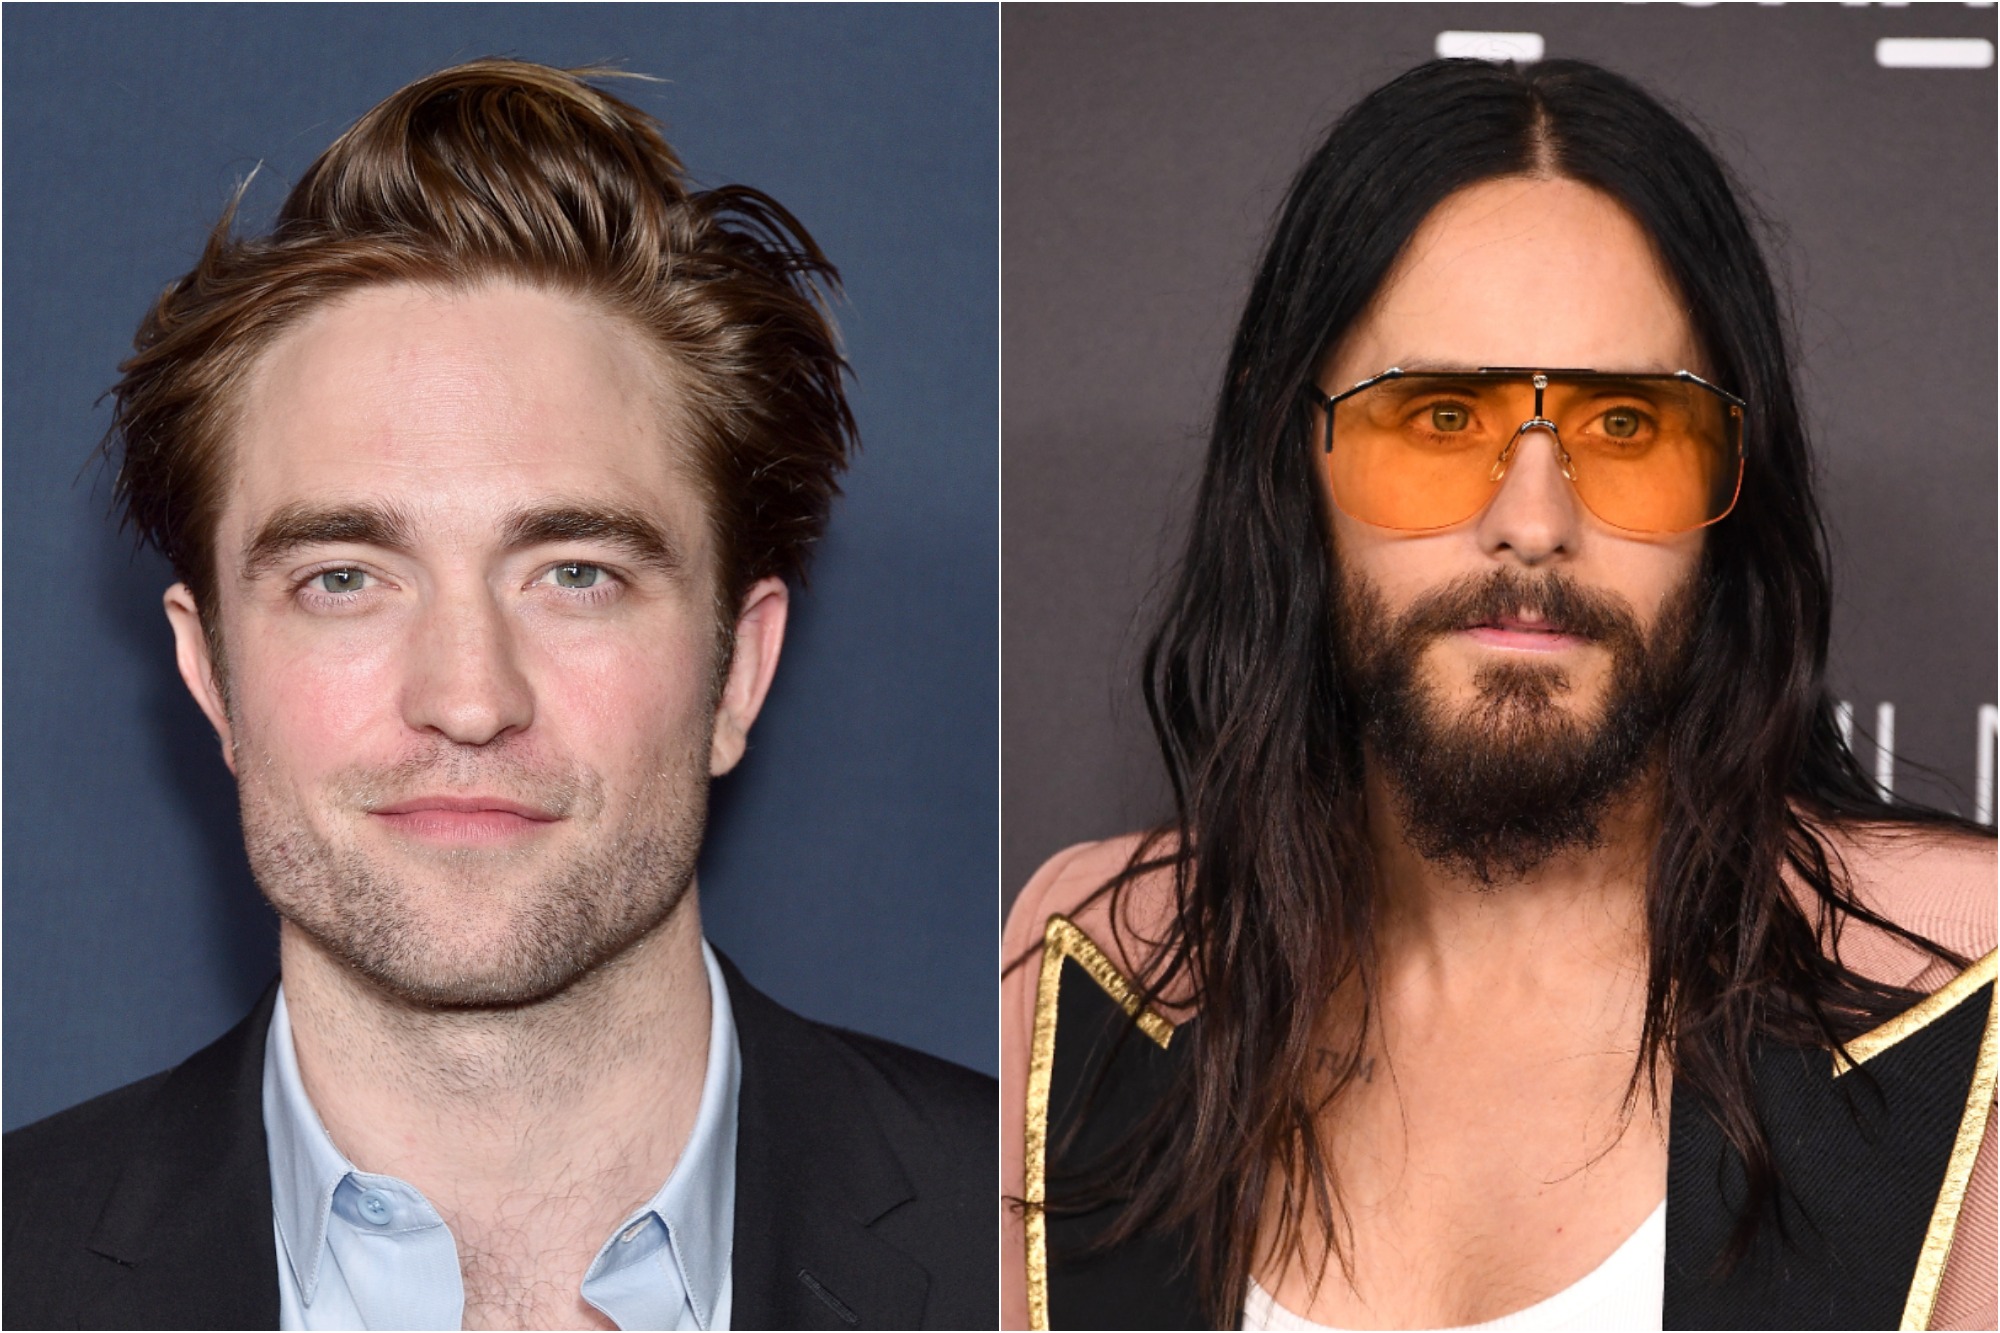 Robert Pattinson’s Opinion on Method Acting Is Different From Jared Leto’s; Their DC Journeys Are Bound To Contrast